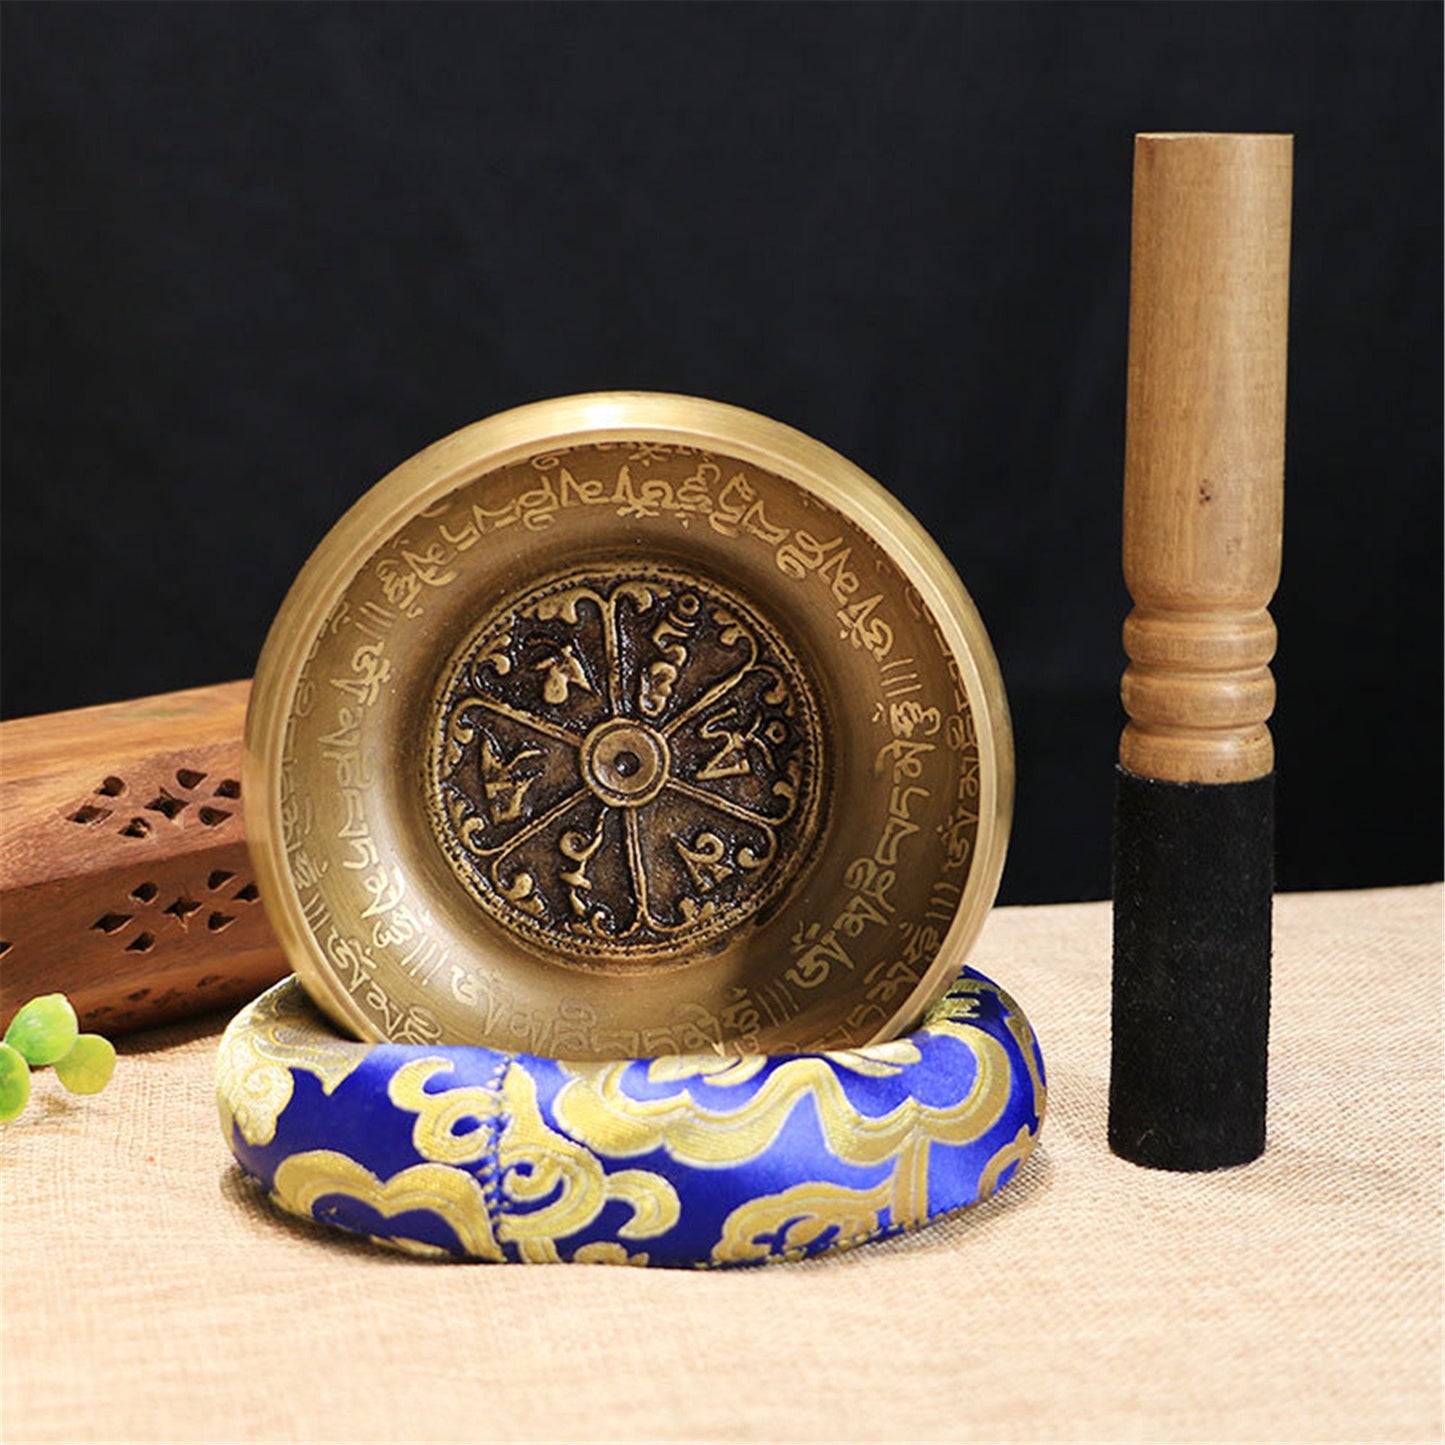 Gandhanra 4.7" Tibetan Singing Bowl Carved with Buddha Statues and Mentra